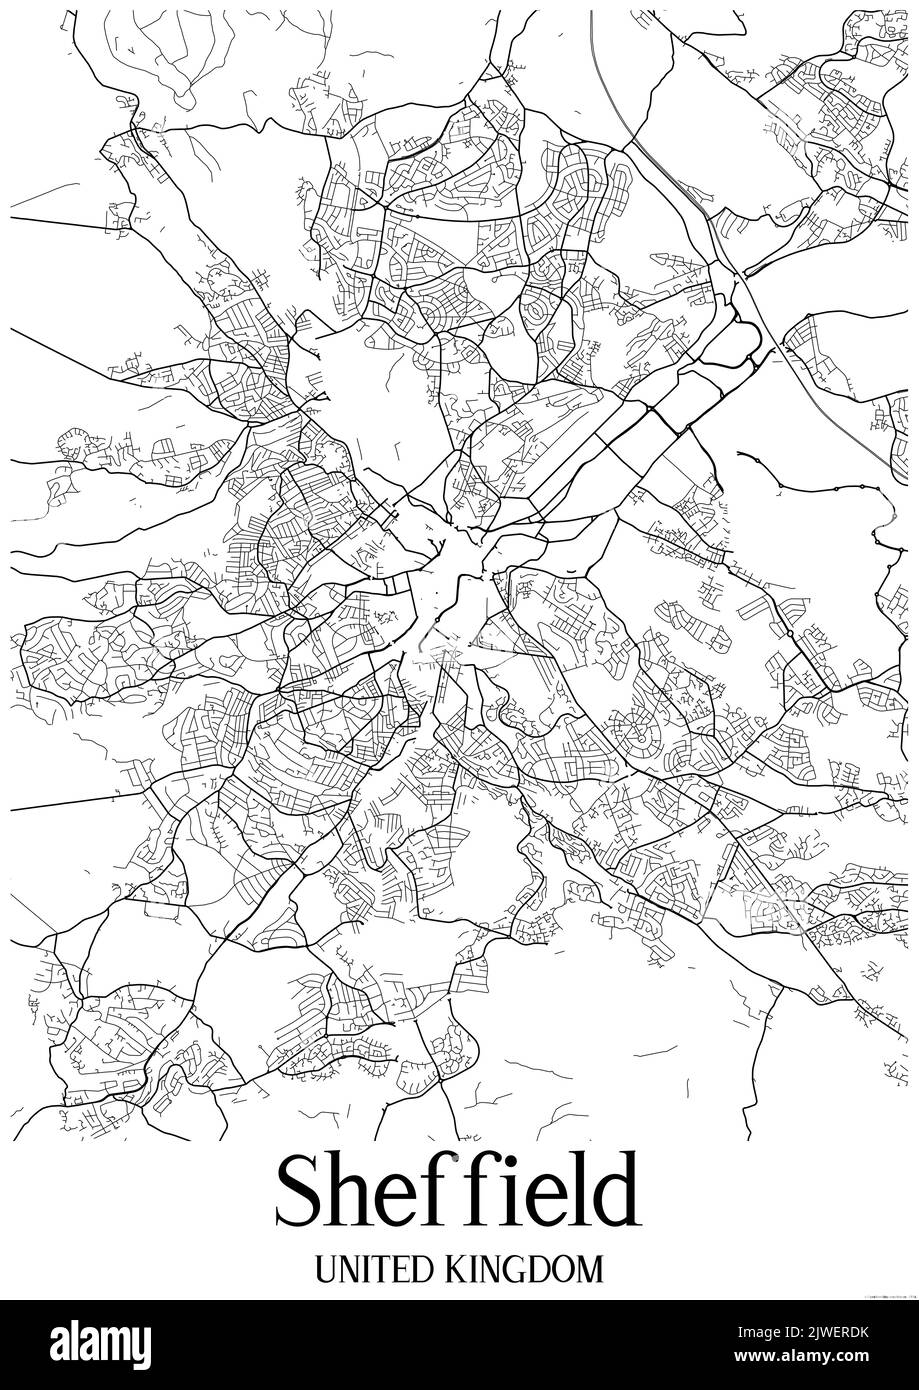 Black and white classic urban map of Sheffield United Kingdom.This map contains geographic lines for main and secondary roads. Stock Photo